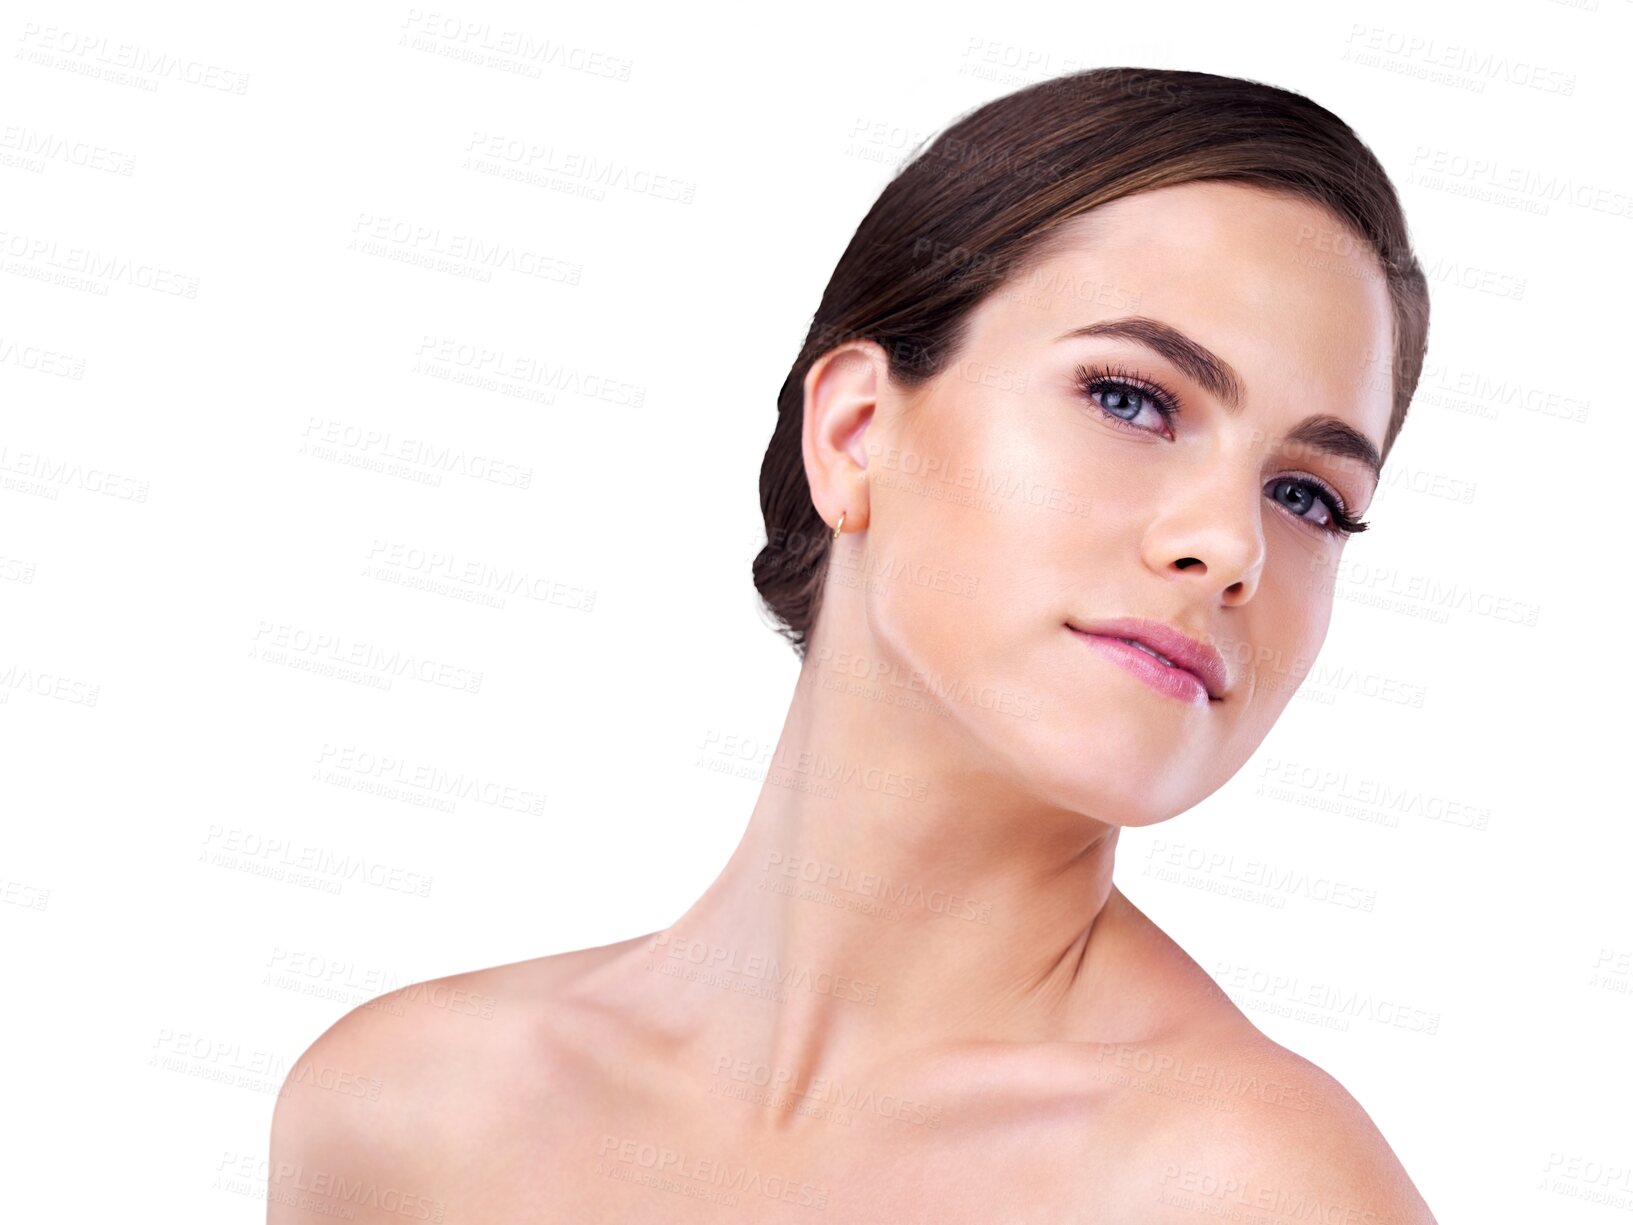 Buy stock photo Makeup, skincare and portrait of woman with cosmetics, confidence and isolated on transparent png background. Dermatology, natural beauty and face of girl with skin glow, wellness and healthy facial.